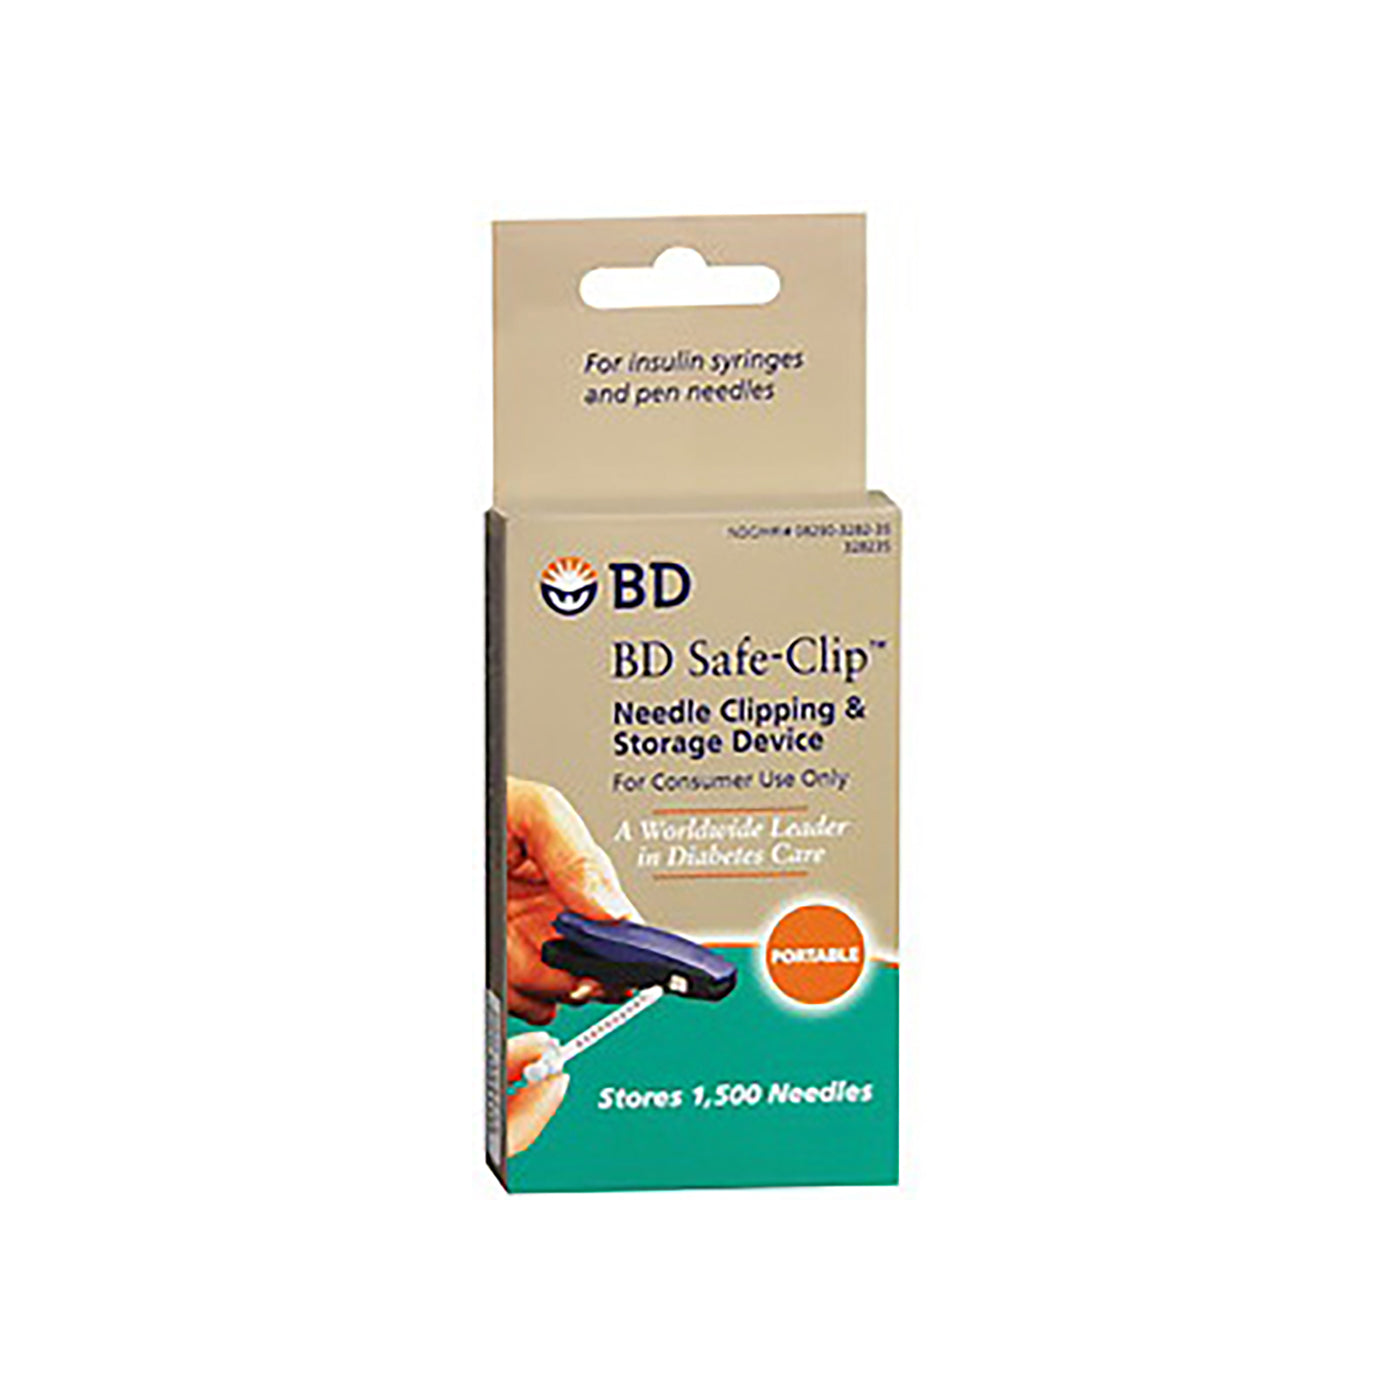 BD Safe-Clip Needle Clipping Storage Device Box|BD Safe-Clip Needle Clipping Storage Device & Box